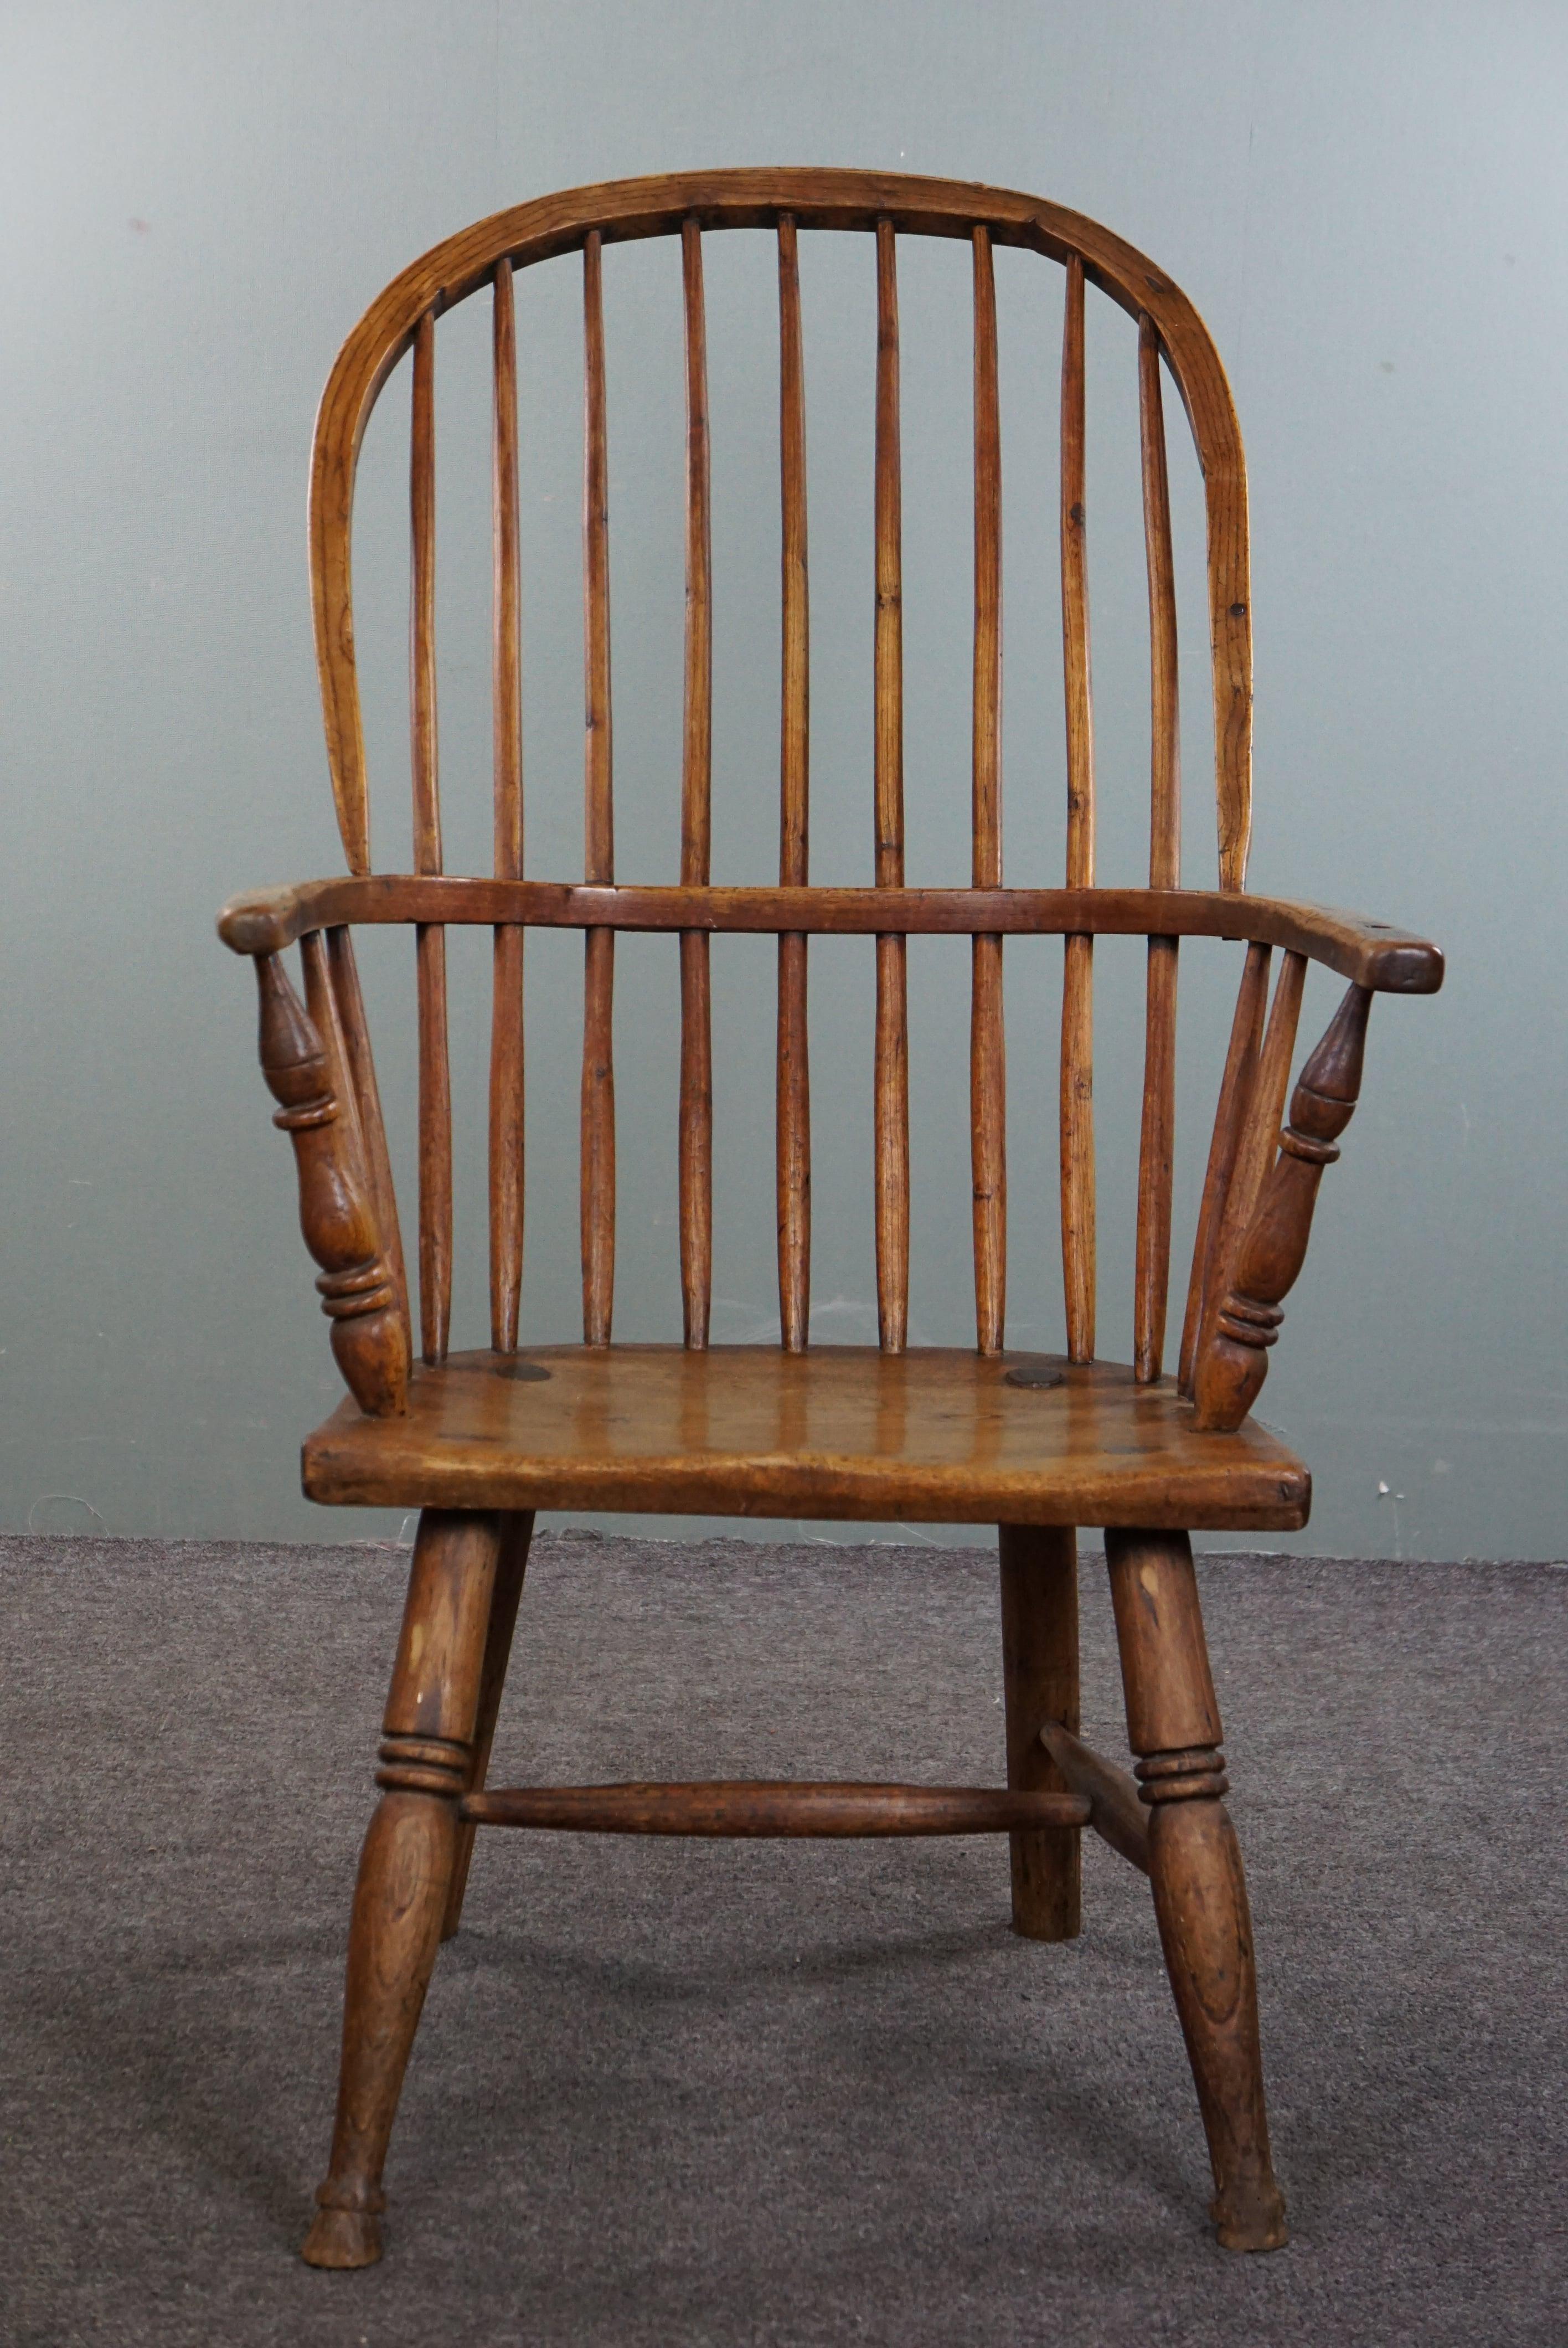 Offered is this beautiful antique English stick back Windsor chair from the early 19th century. The Windsor chair is a timeless classic and can easily be placed in both a modern and a classic interior.

The chair offered here by us is in good and